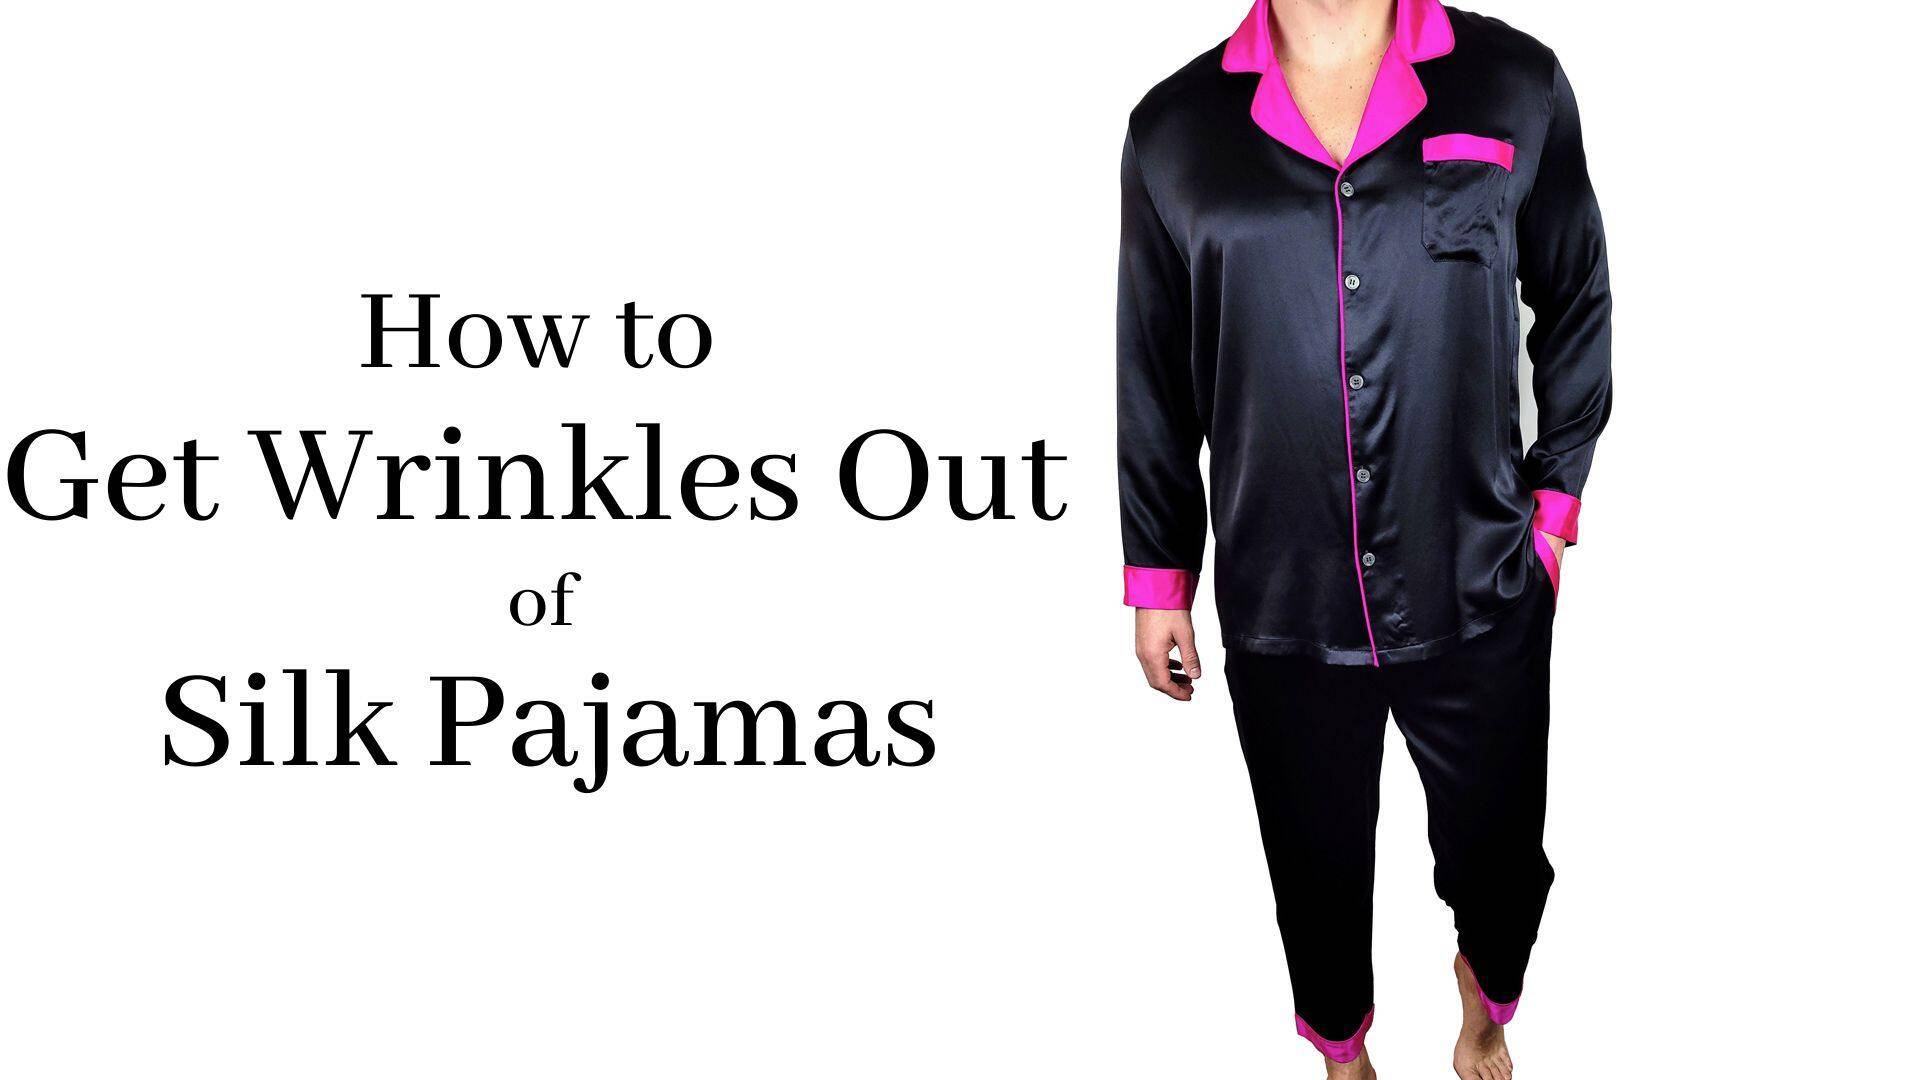 how to get wrinkles out of silk pajamas header image